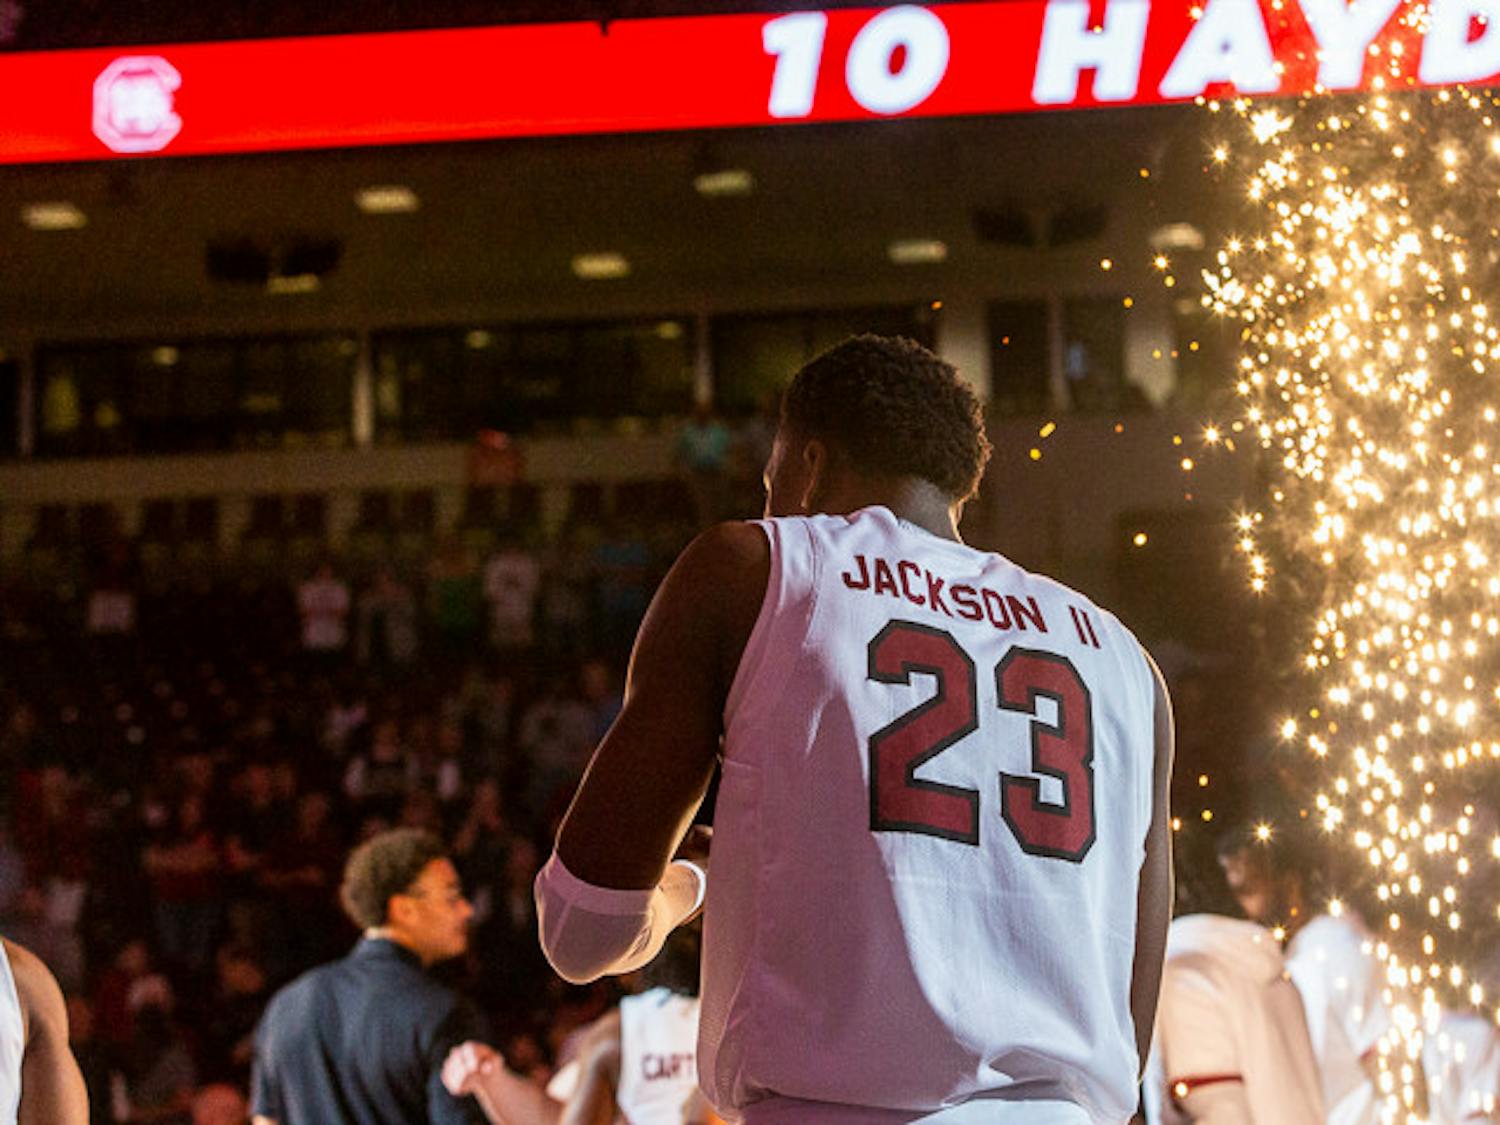 Freshman forward Gregory “GG” Jackson II prepares his handshake when teammate Hayden Brown comes out for introductions. The Gamecocks defeated S.C. State 80-77 in their season opener on Nov. 8, 2022.